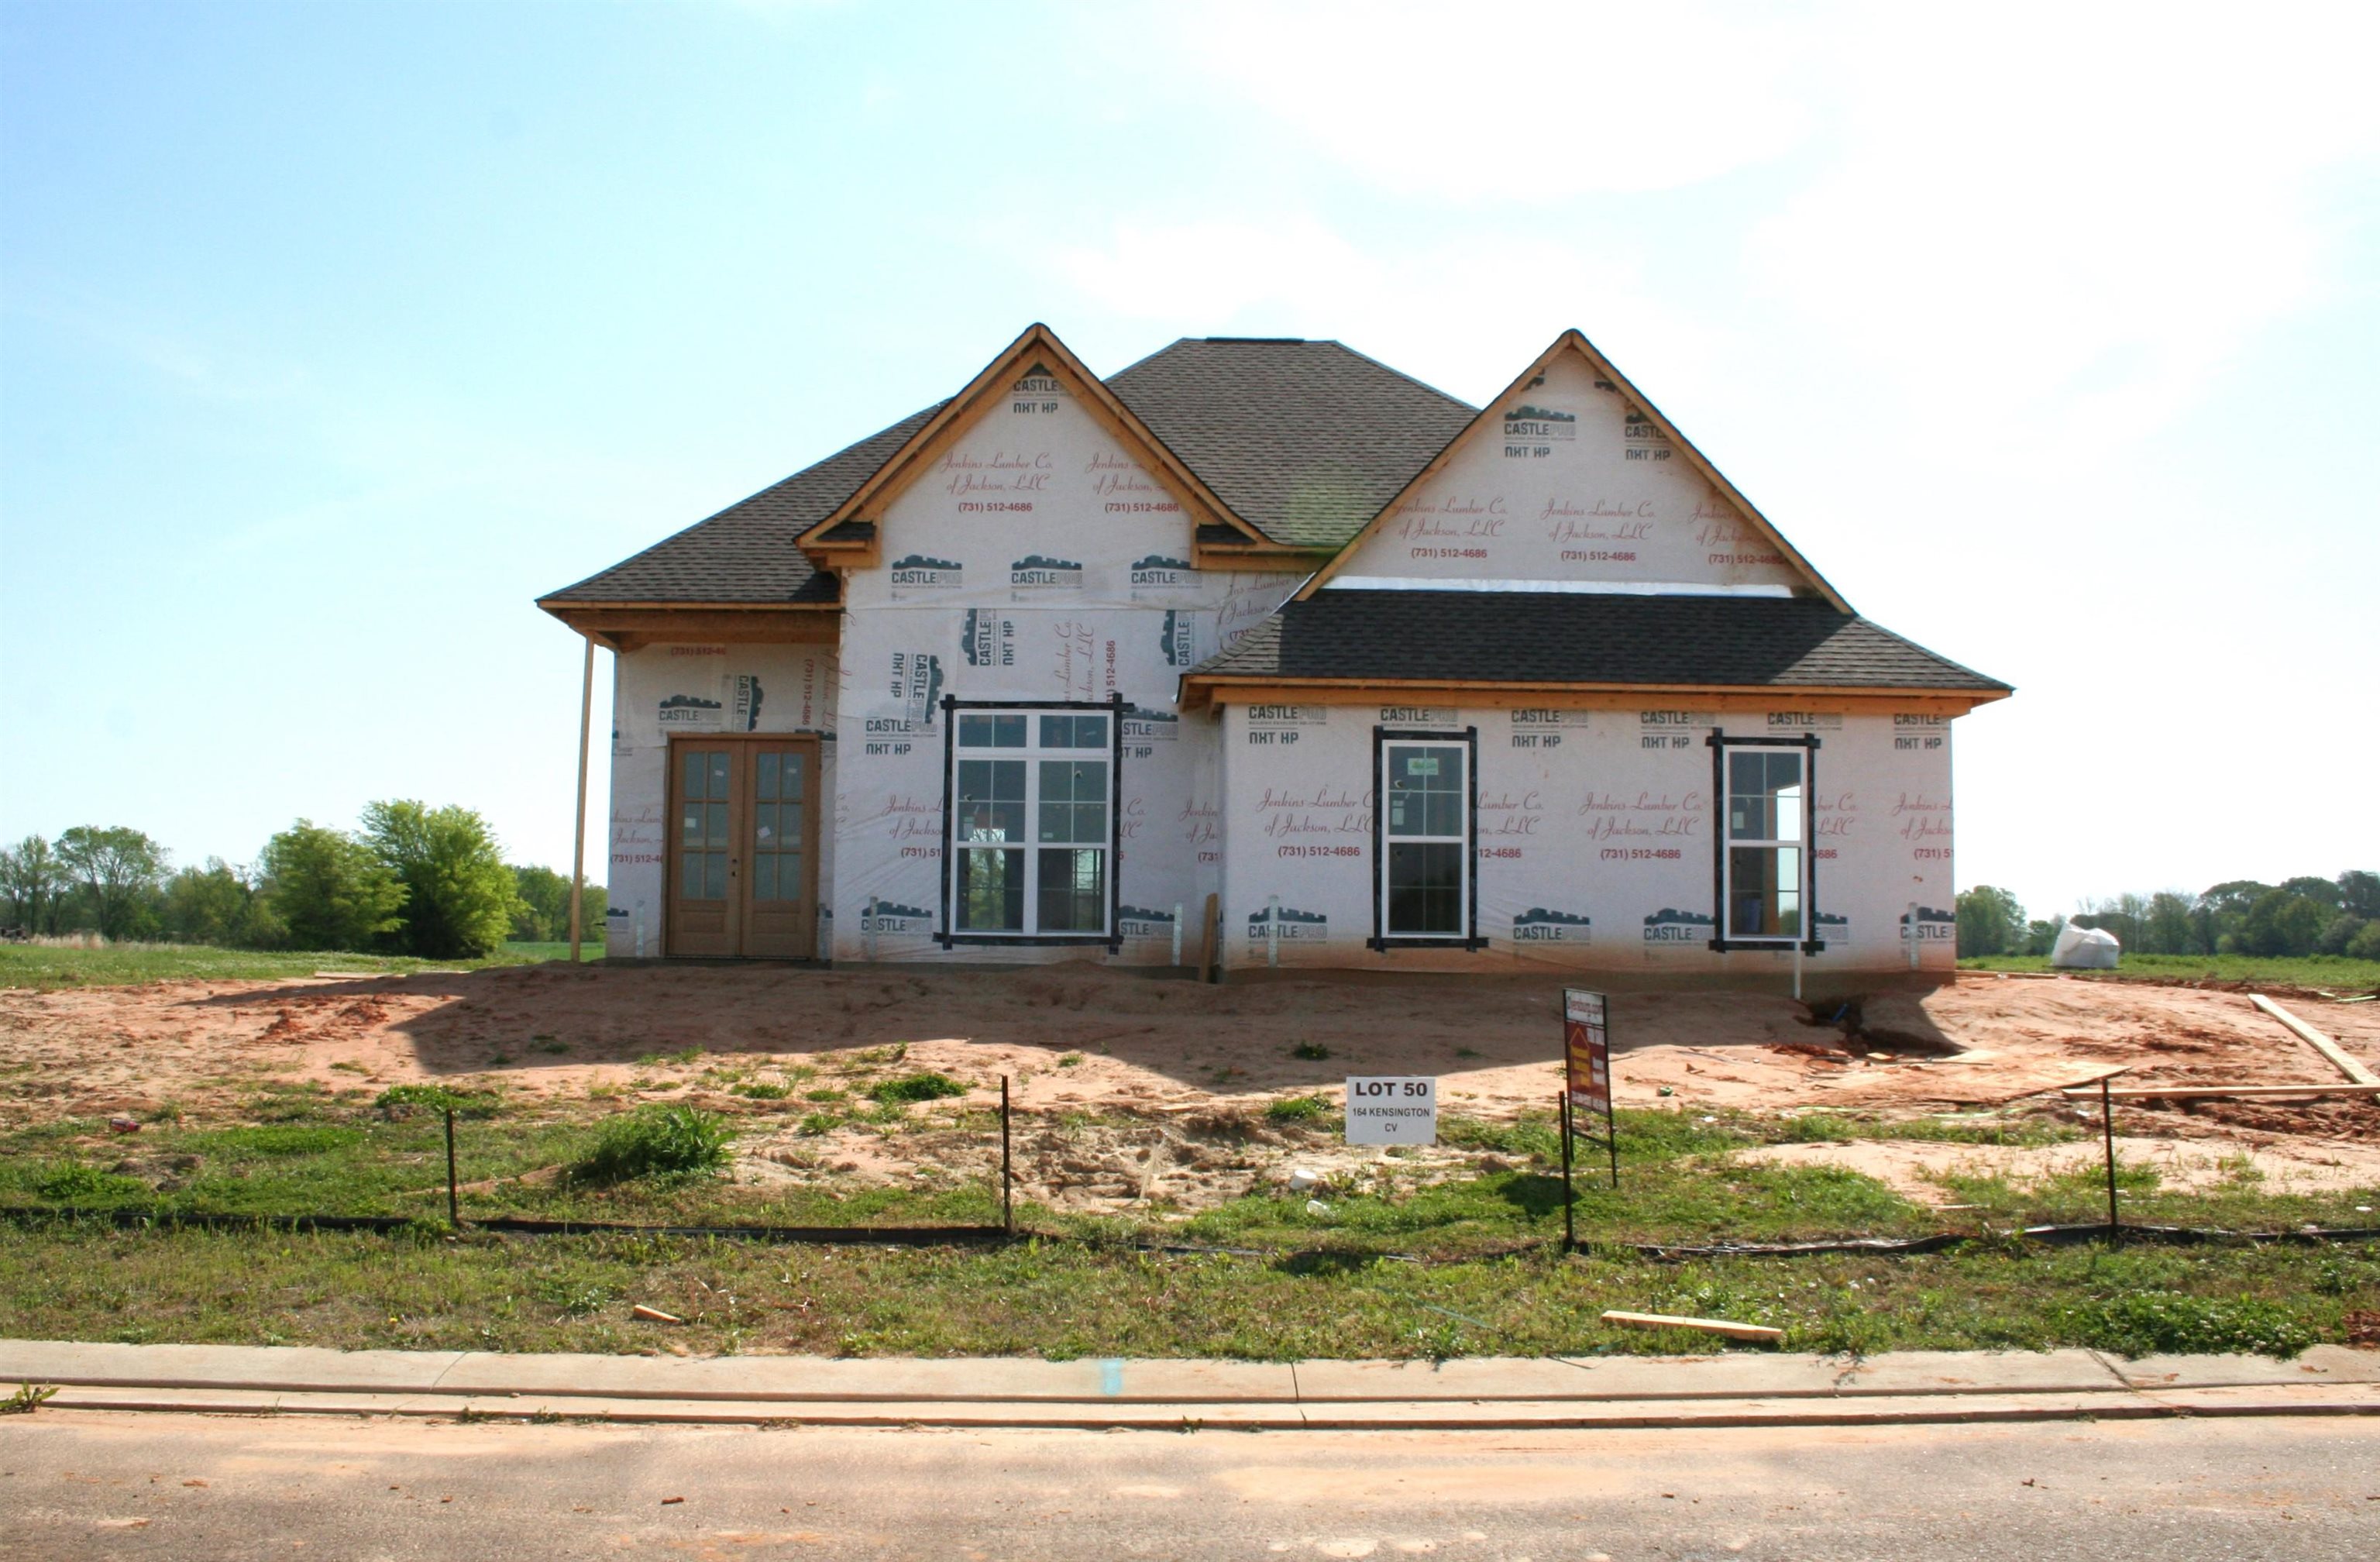 New Construction in Cobblestone Village. Features include vaulted ceilings, open floor plan with large family room, double car garage, separate utility room, covered front porch, large covered back patio with outdoor fireplace and so much more. Call Hunter Newbill today for your showing 731-445-9998.